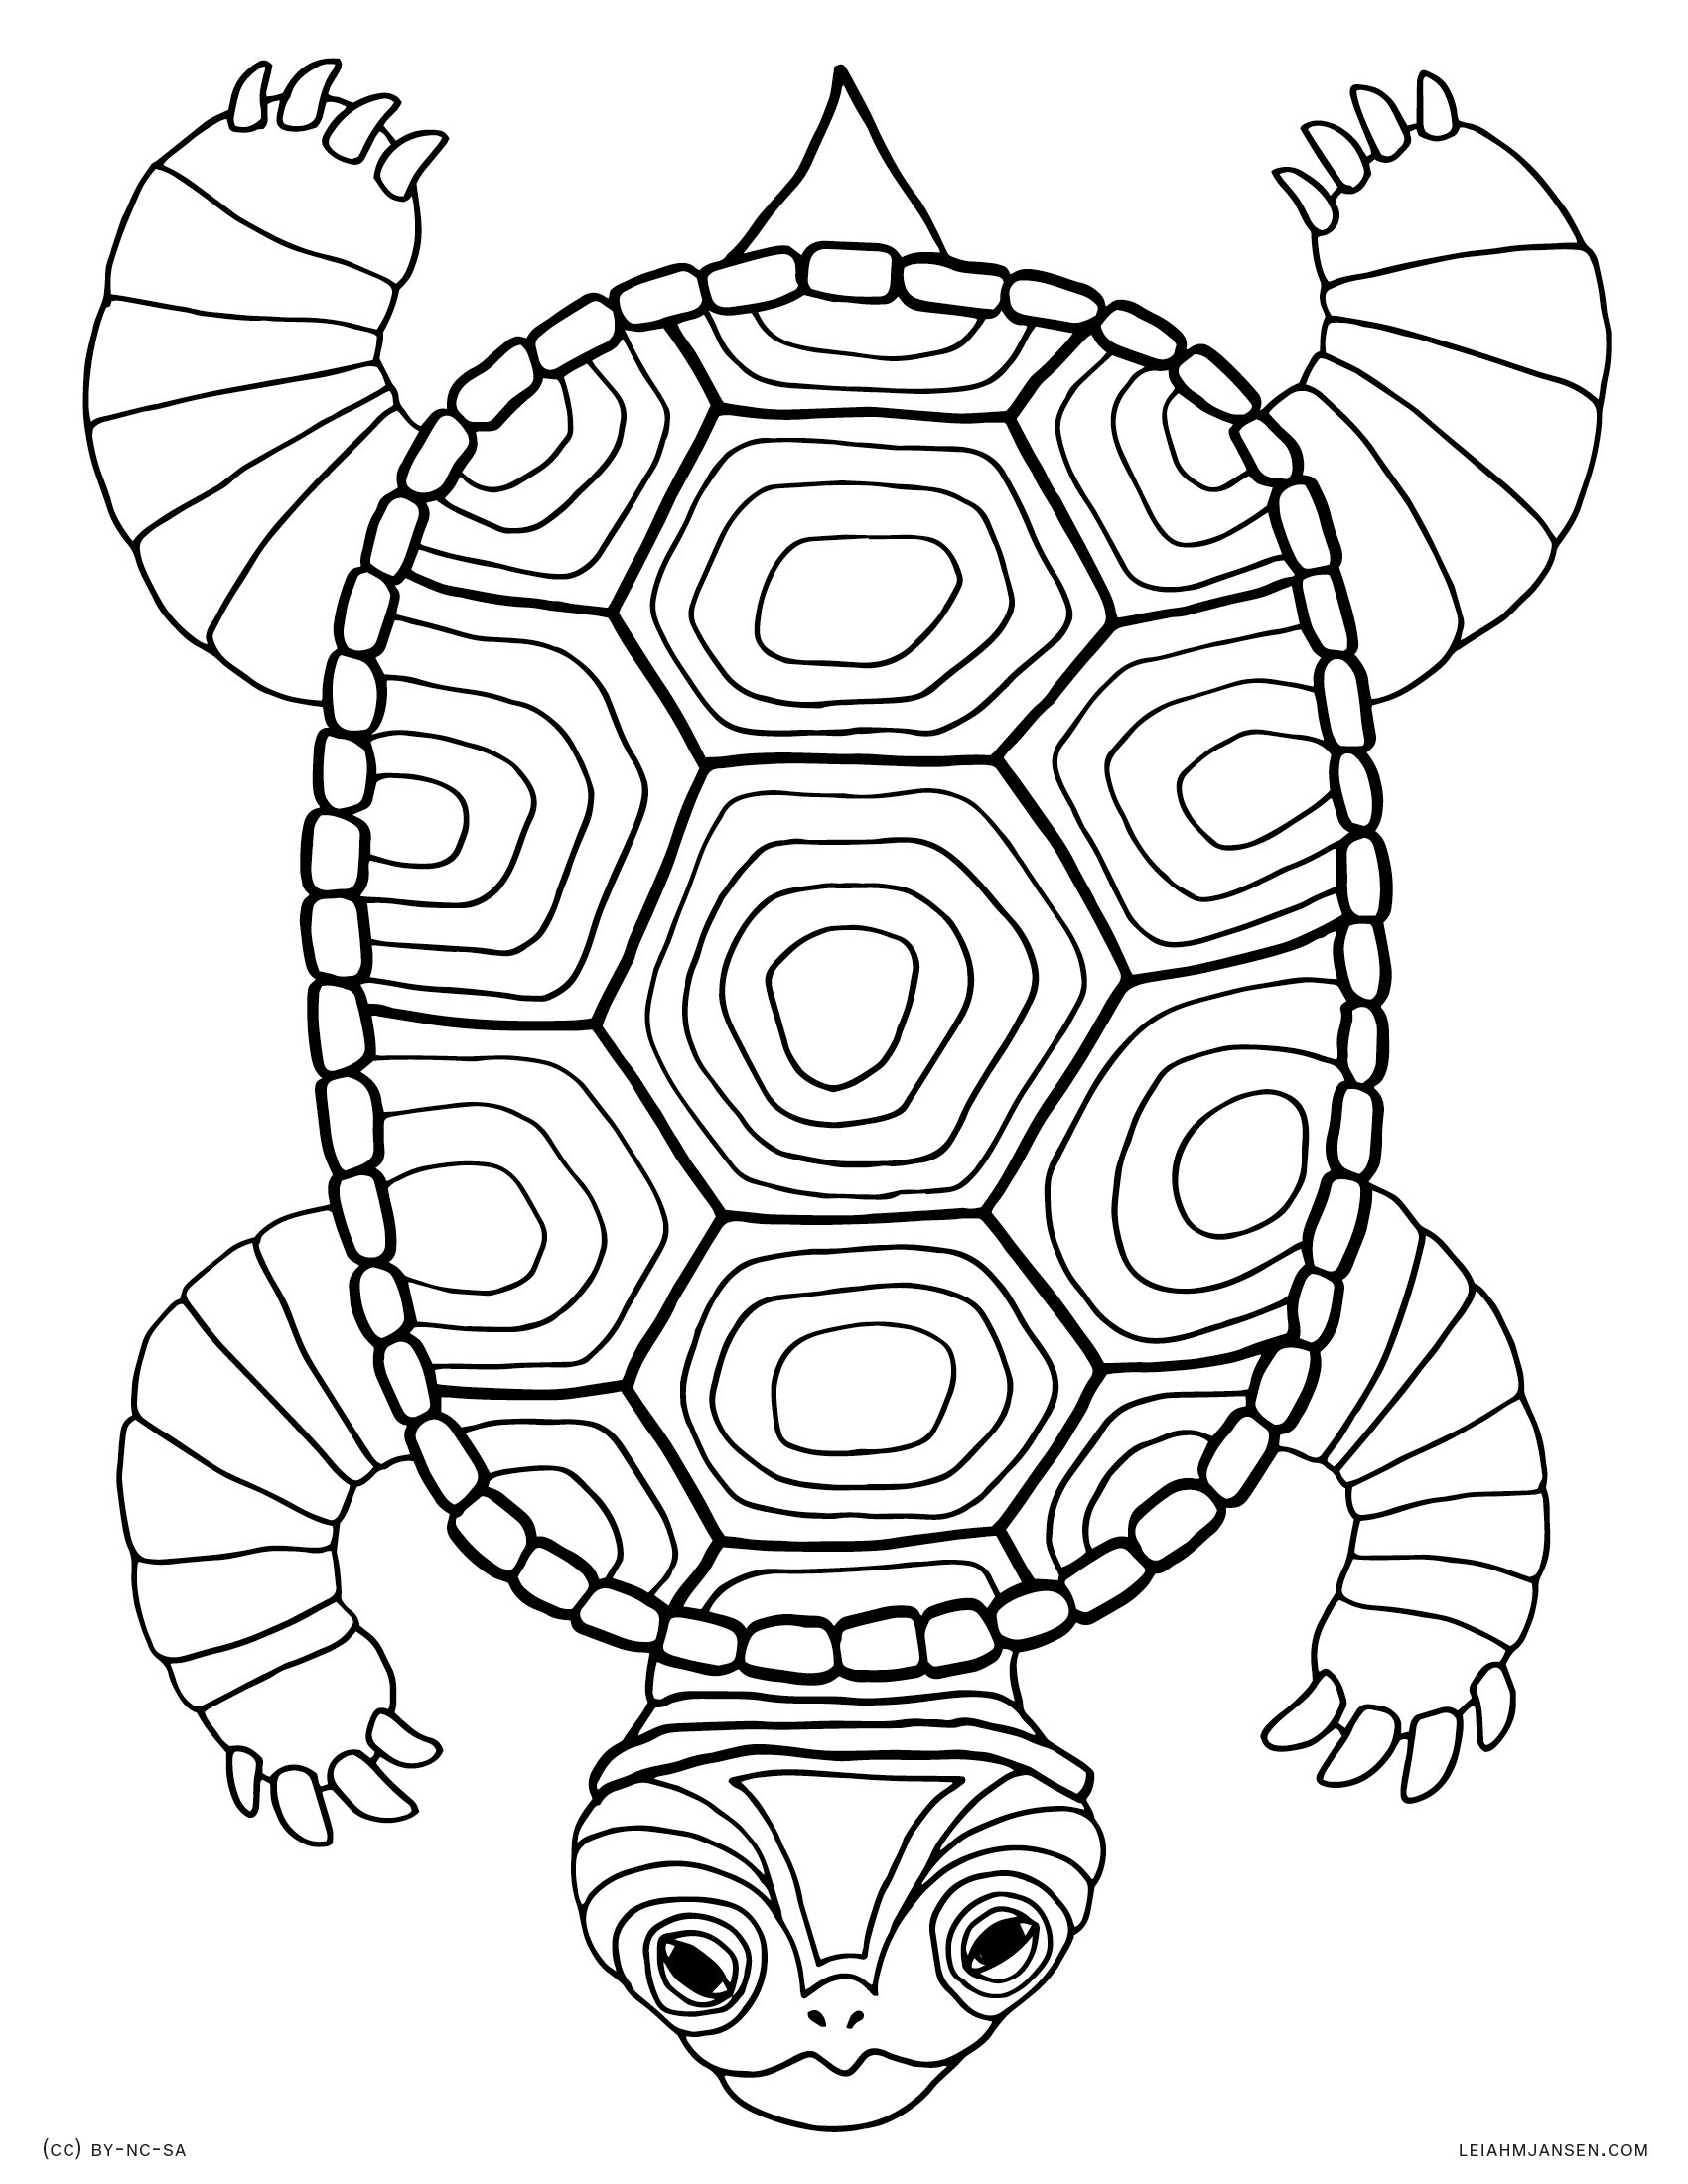 Turtle Coloring Pages For Adults
 Coloring Pages